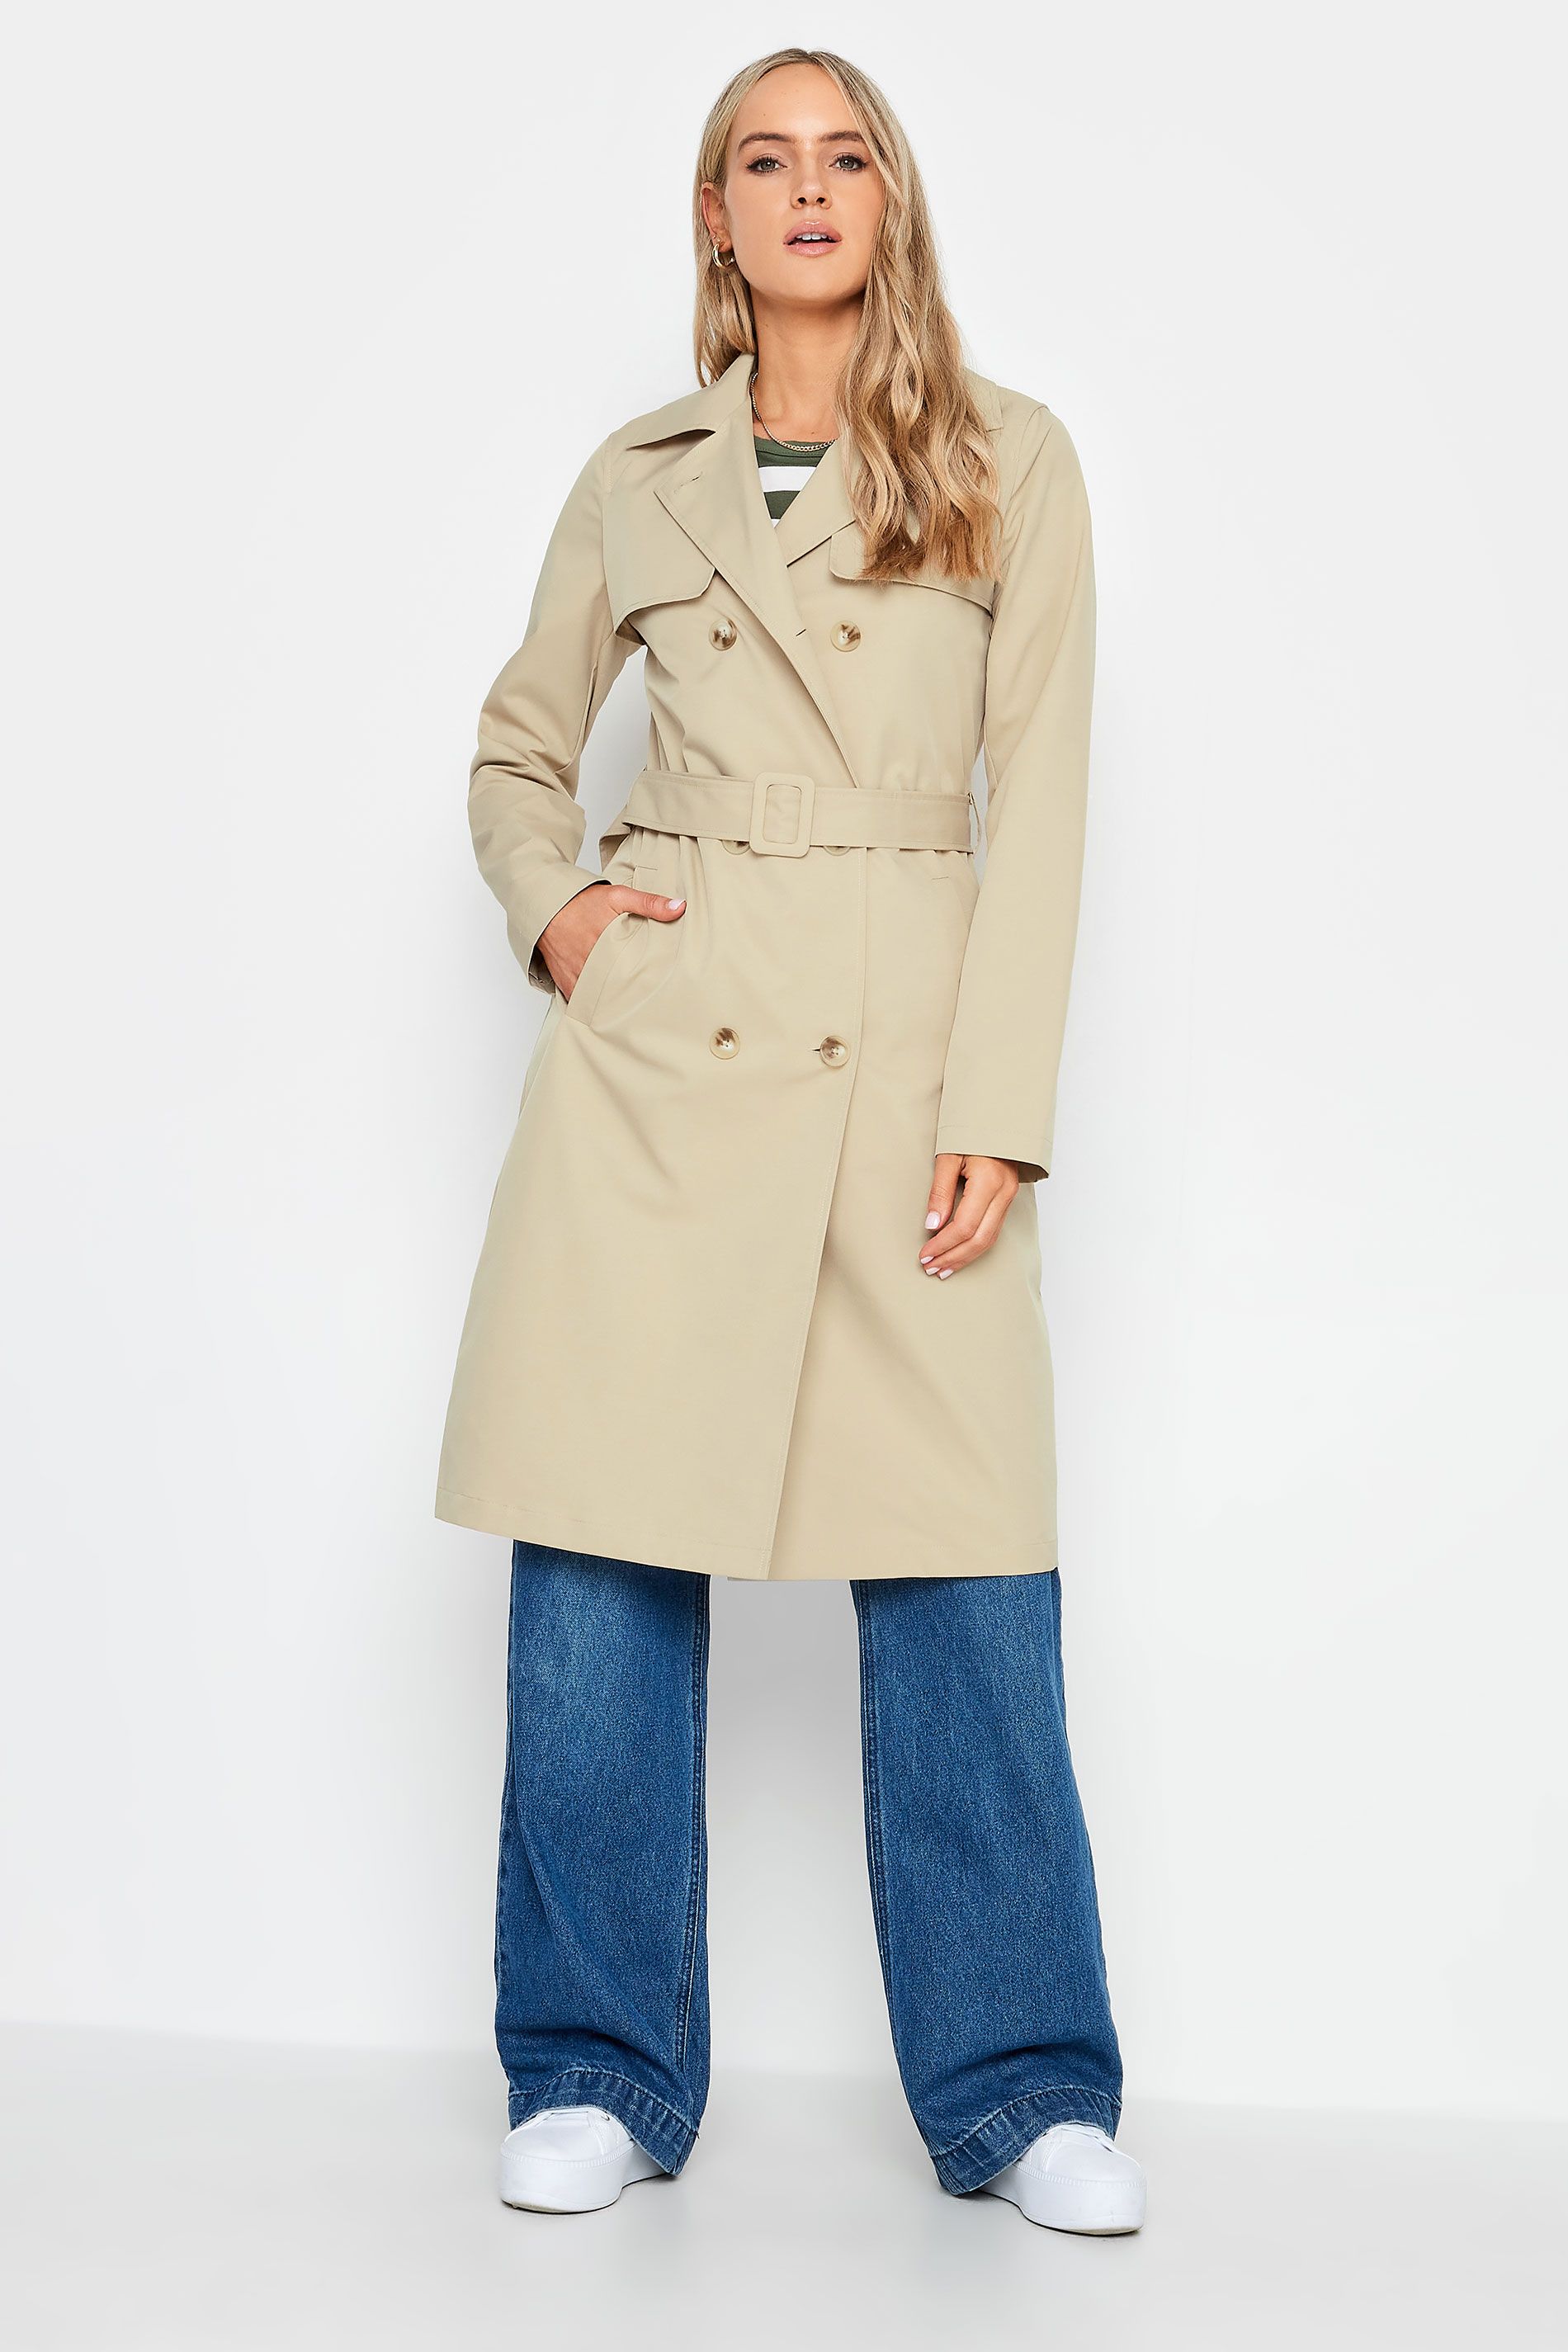 LTS Tall Beige Brown Trench Coat | Long Tall Sally